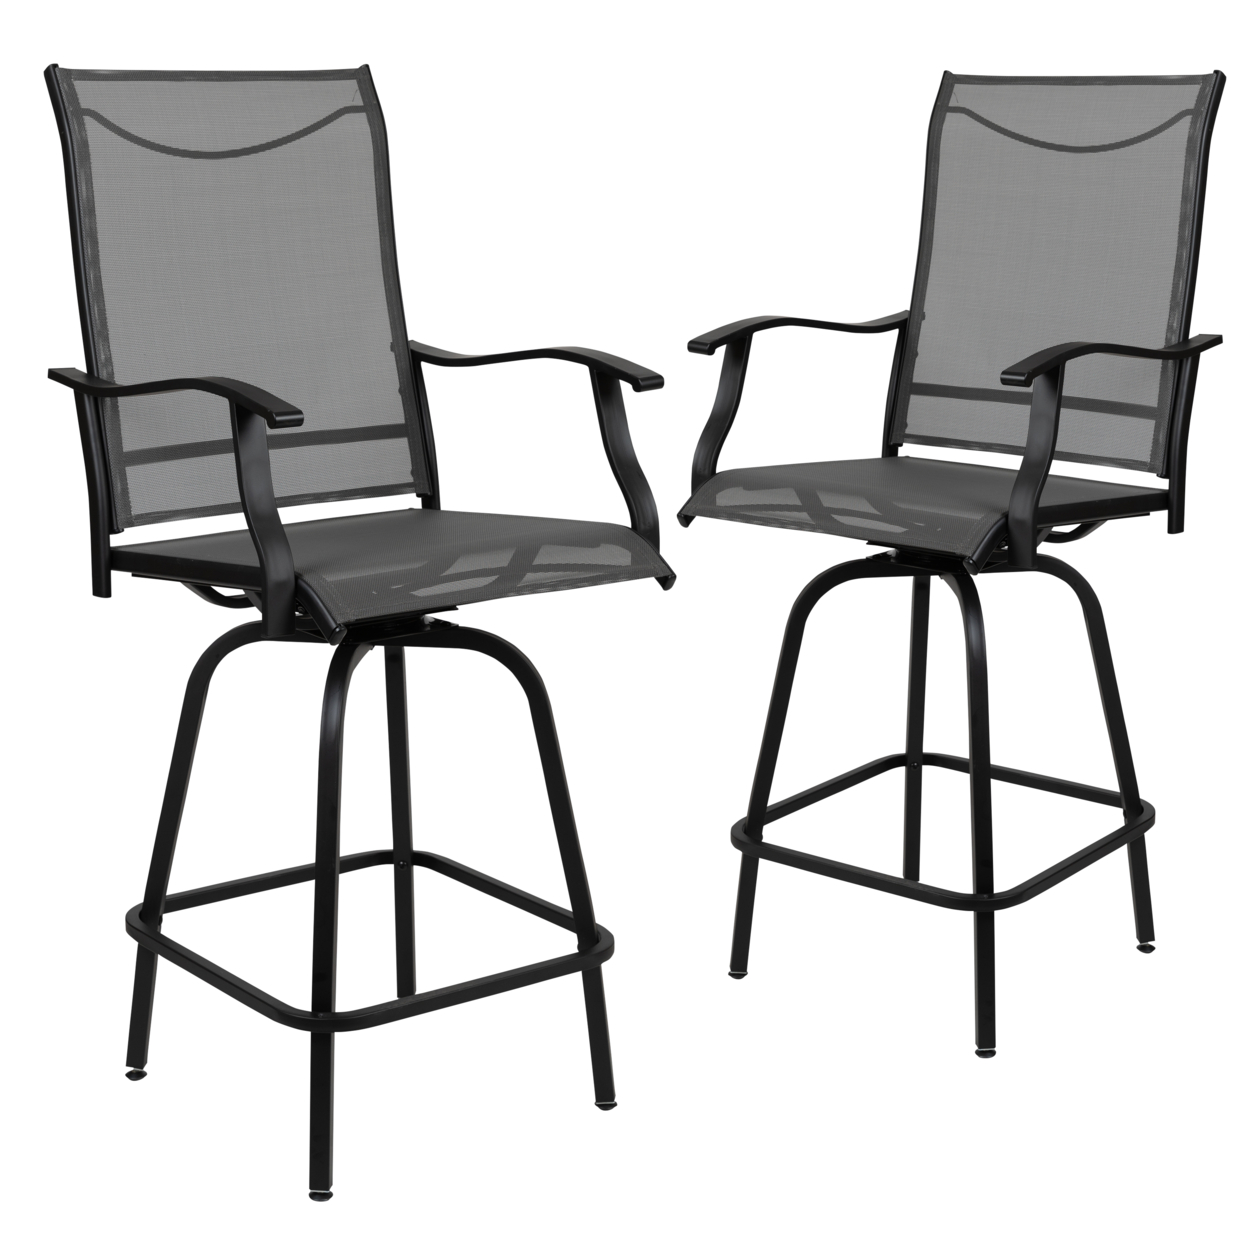 Patio Bar Height Stools Set Of 2, All-Weather Textilene Swivel Patio Stools And Deck Chairs With High Back & Armrests In Gray